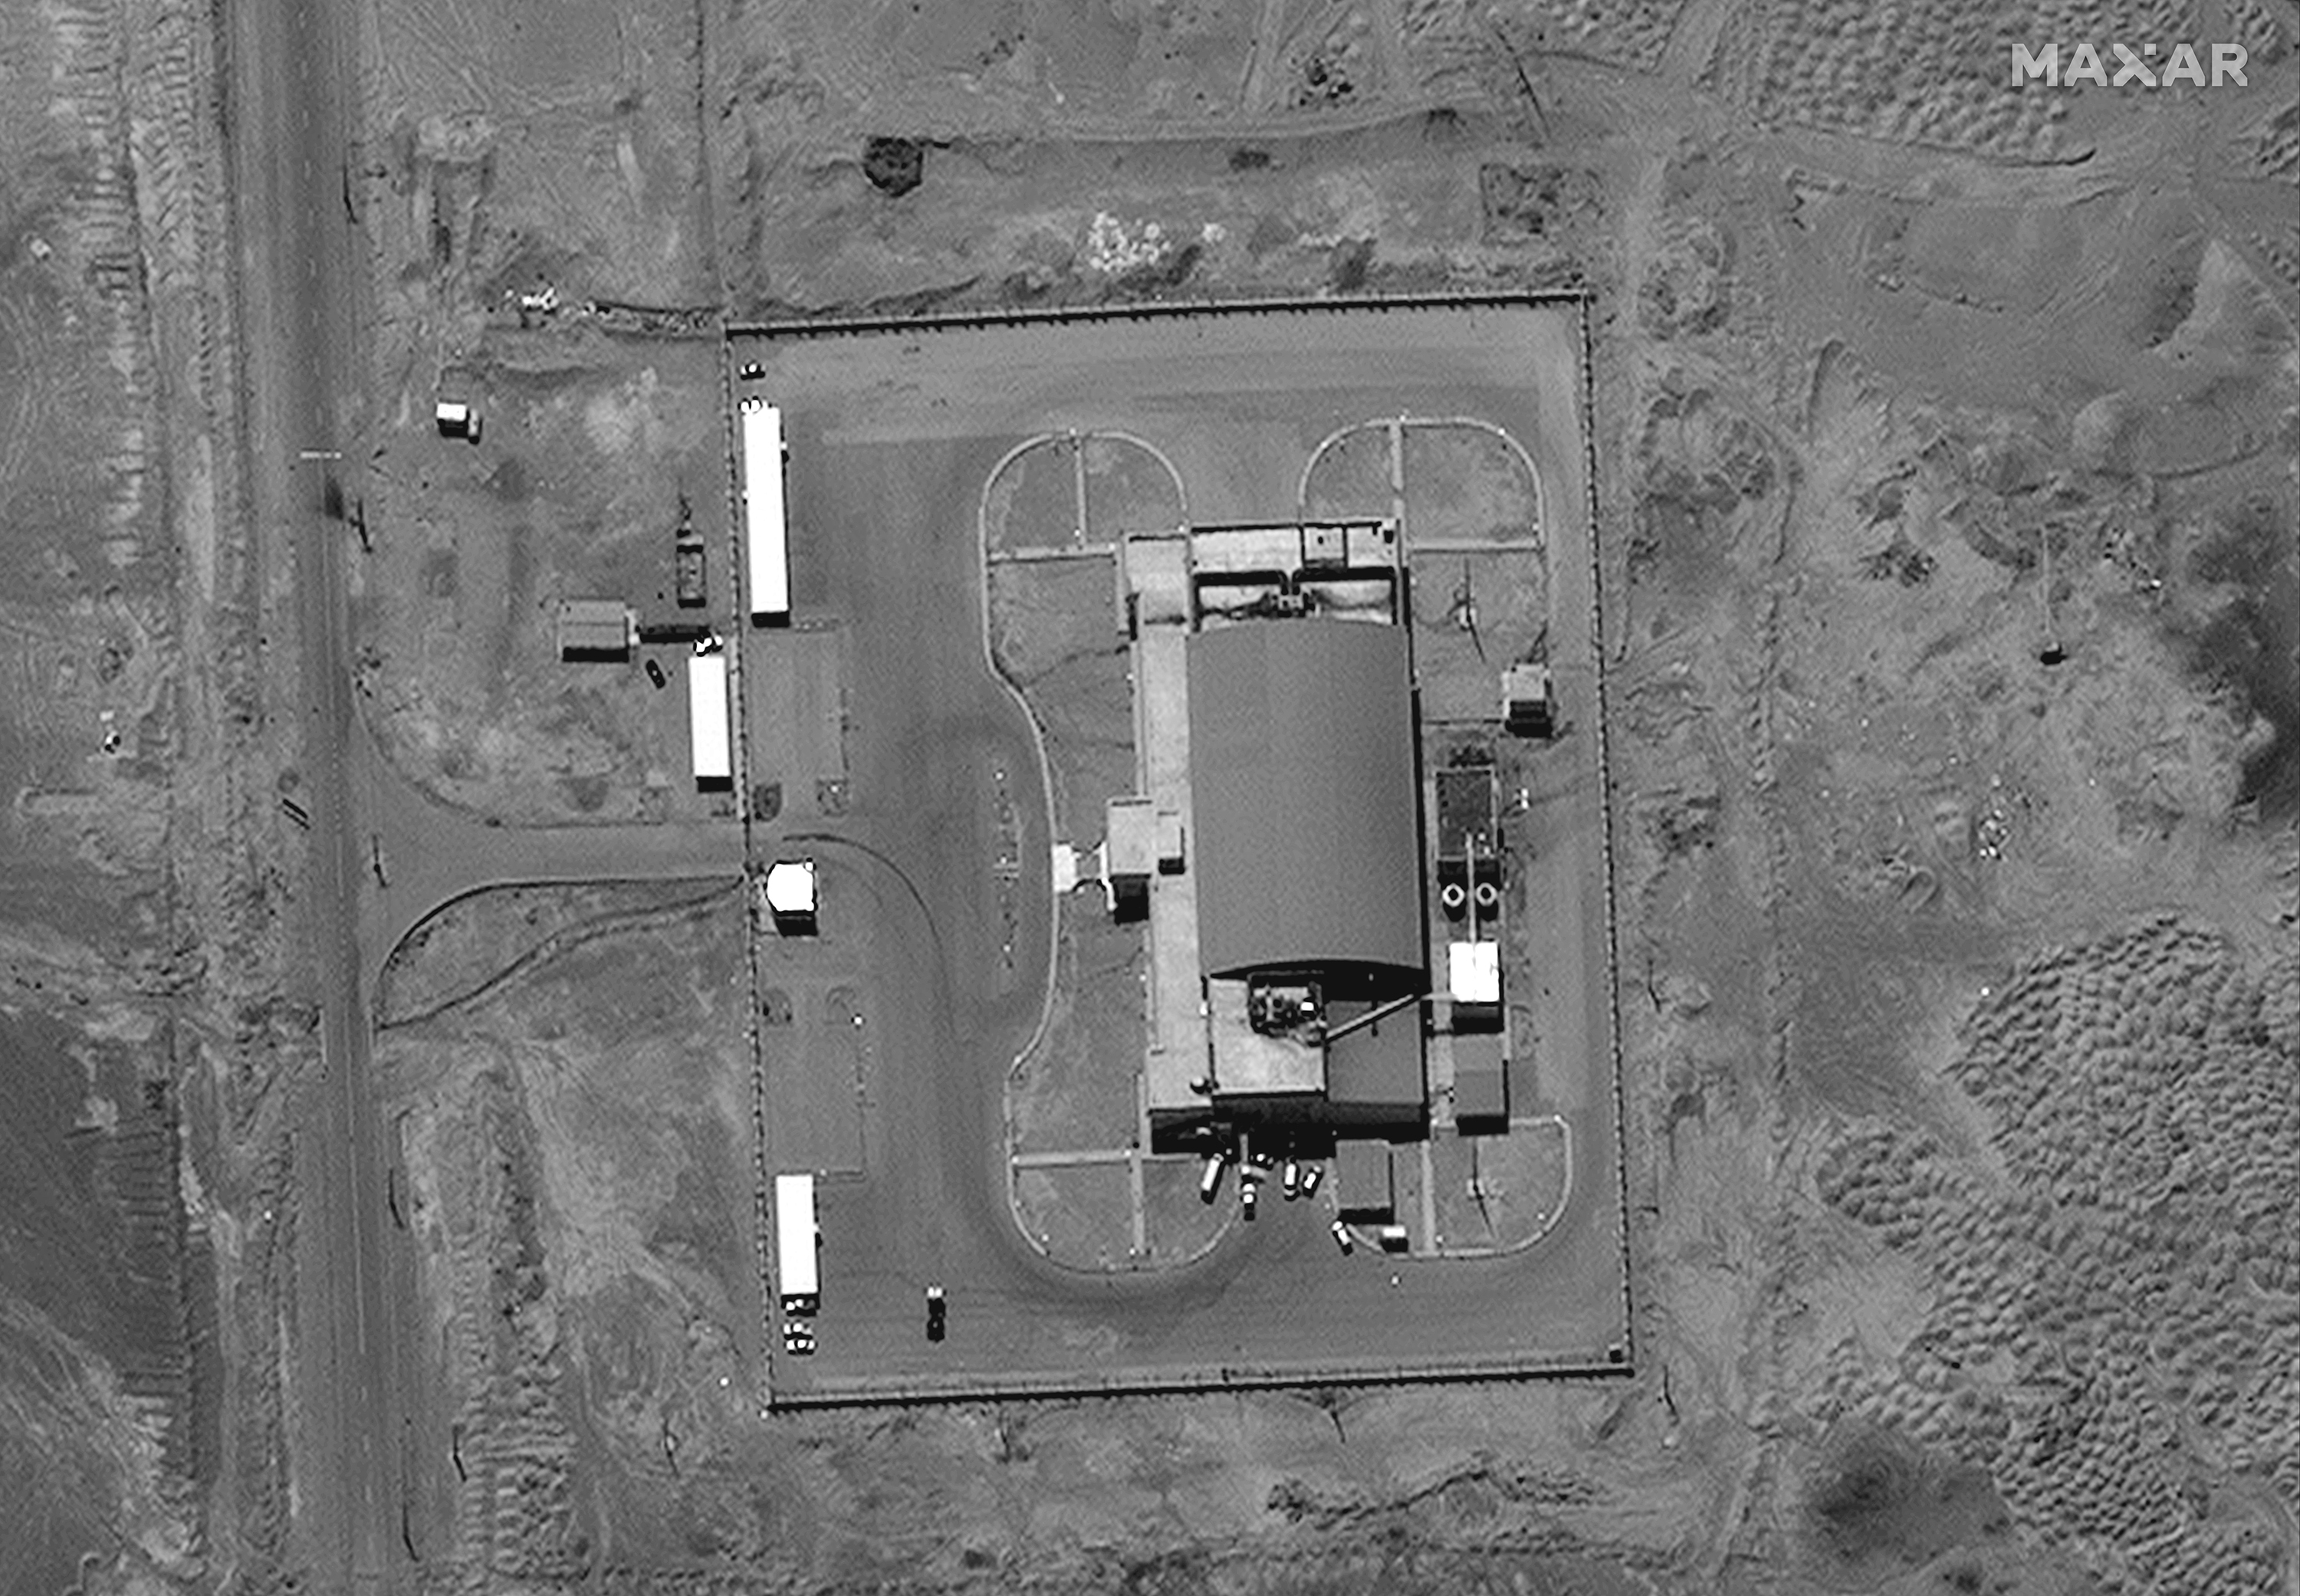 A satellite image shows vehicles at the Imam Khomeini Space Centre